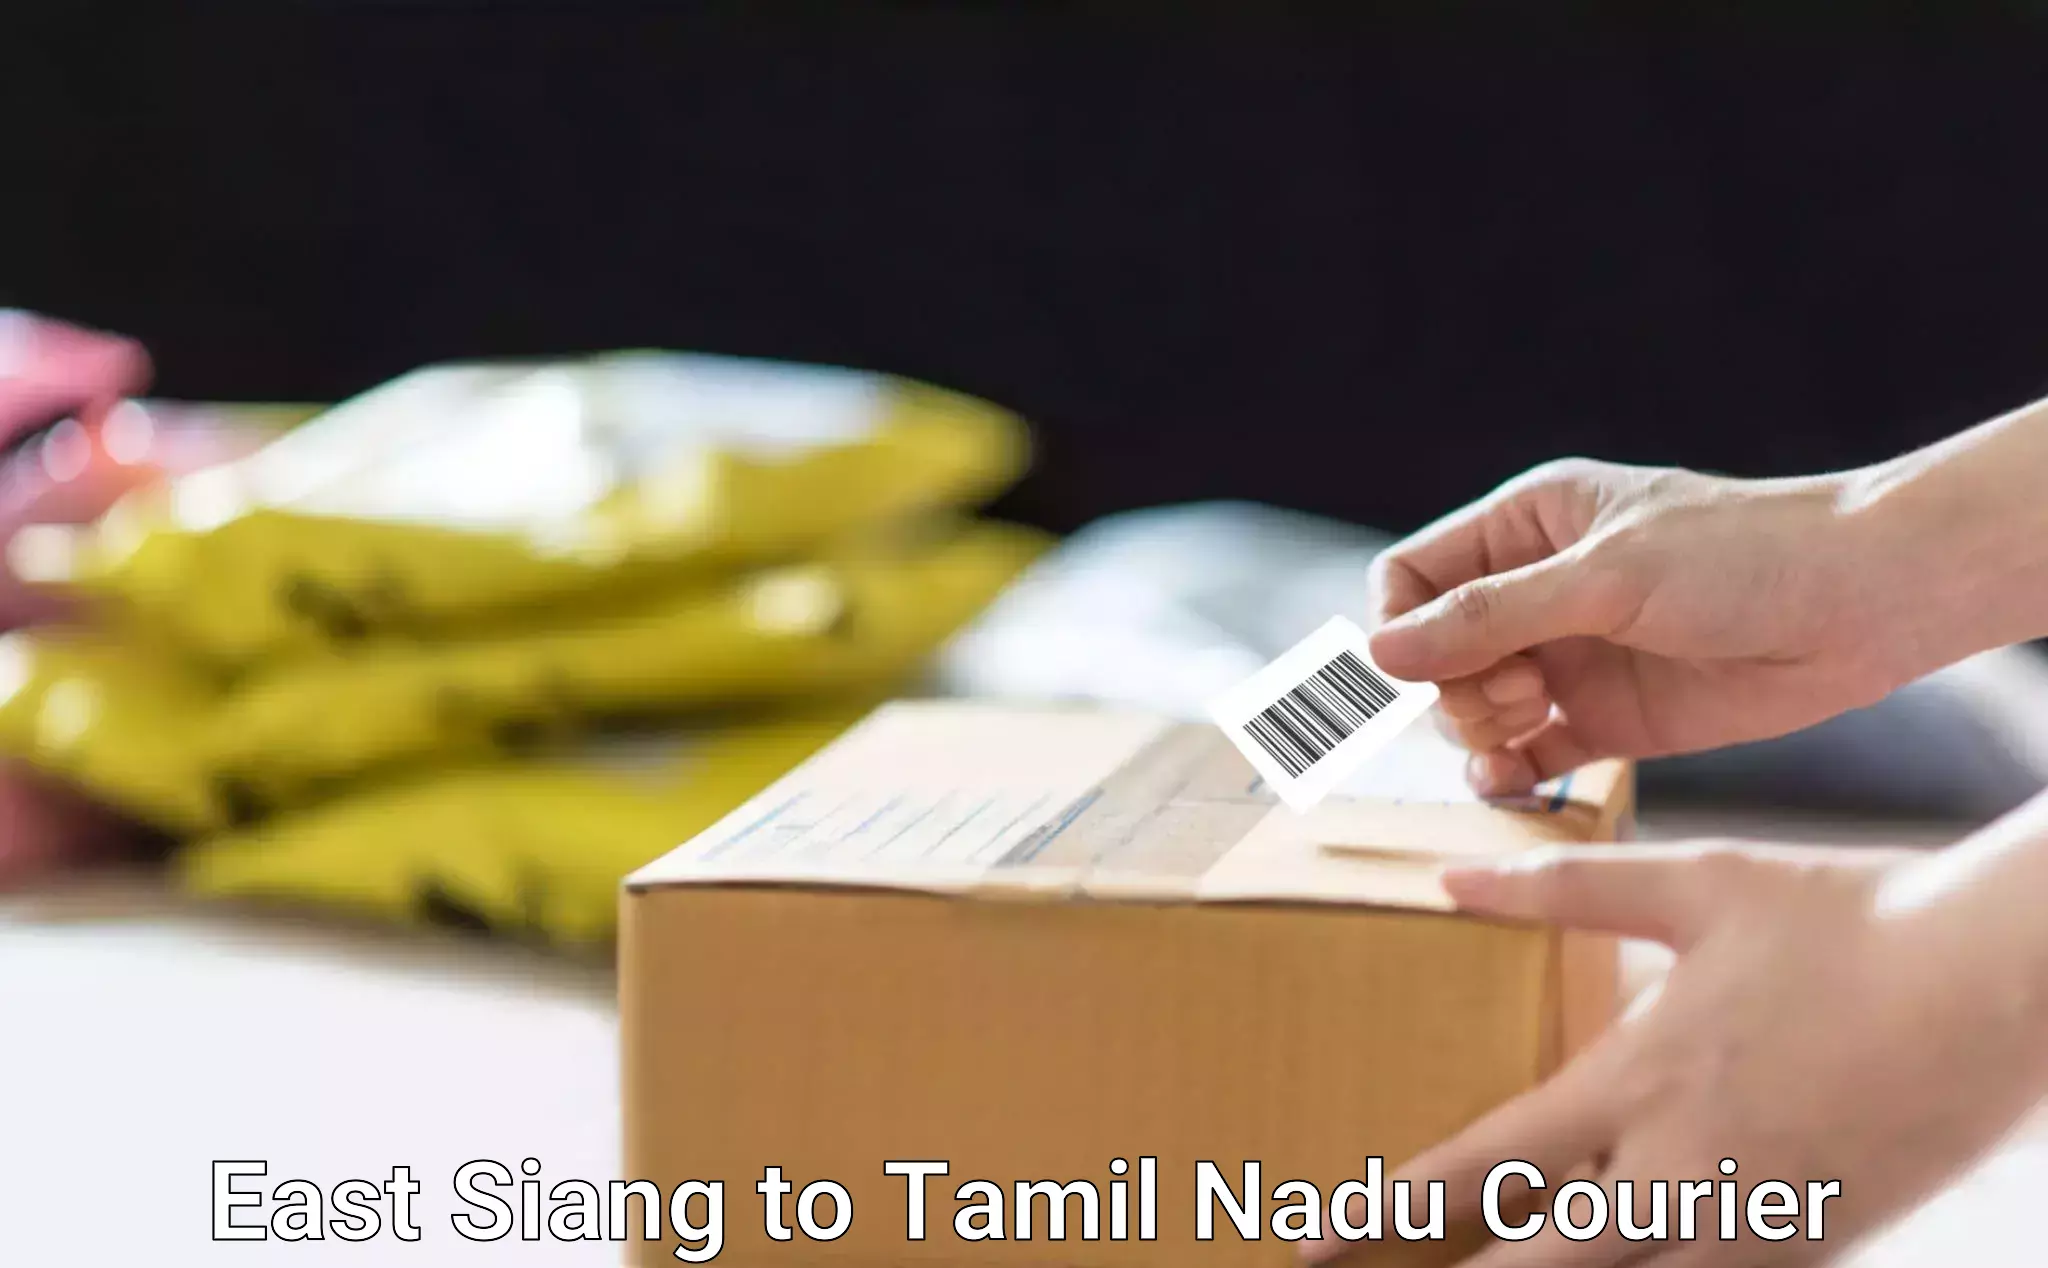 Advanced shipping services East Siang to Tamil Nadu